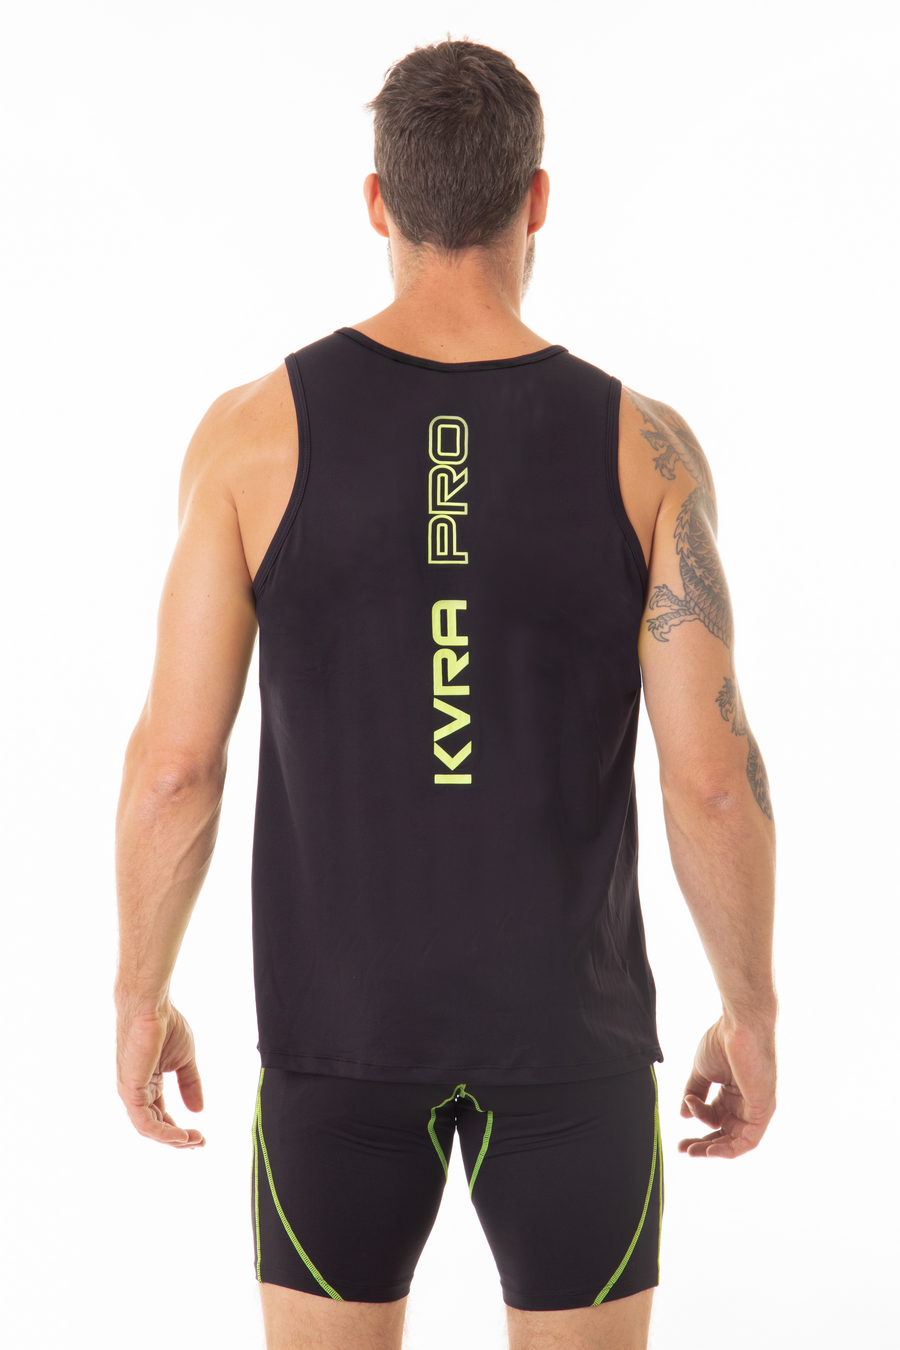 FUNCTION- Performance Tank Top